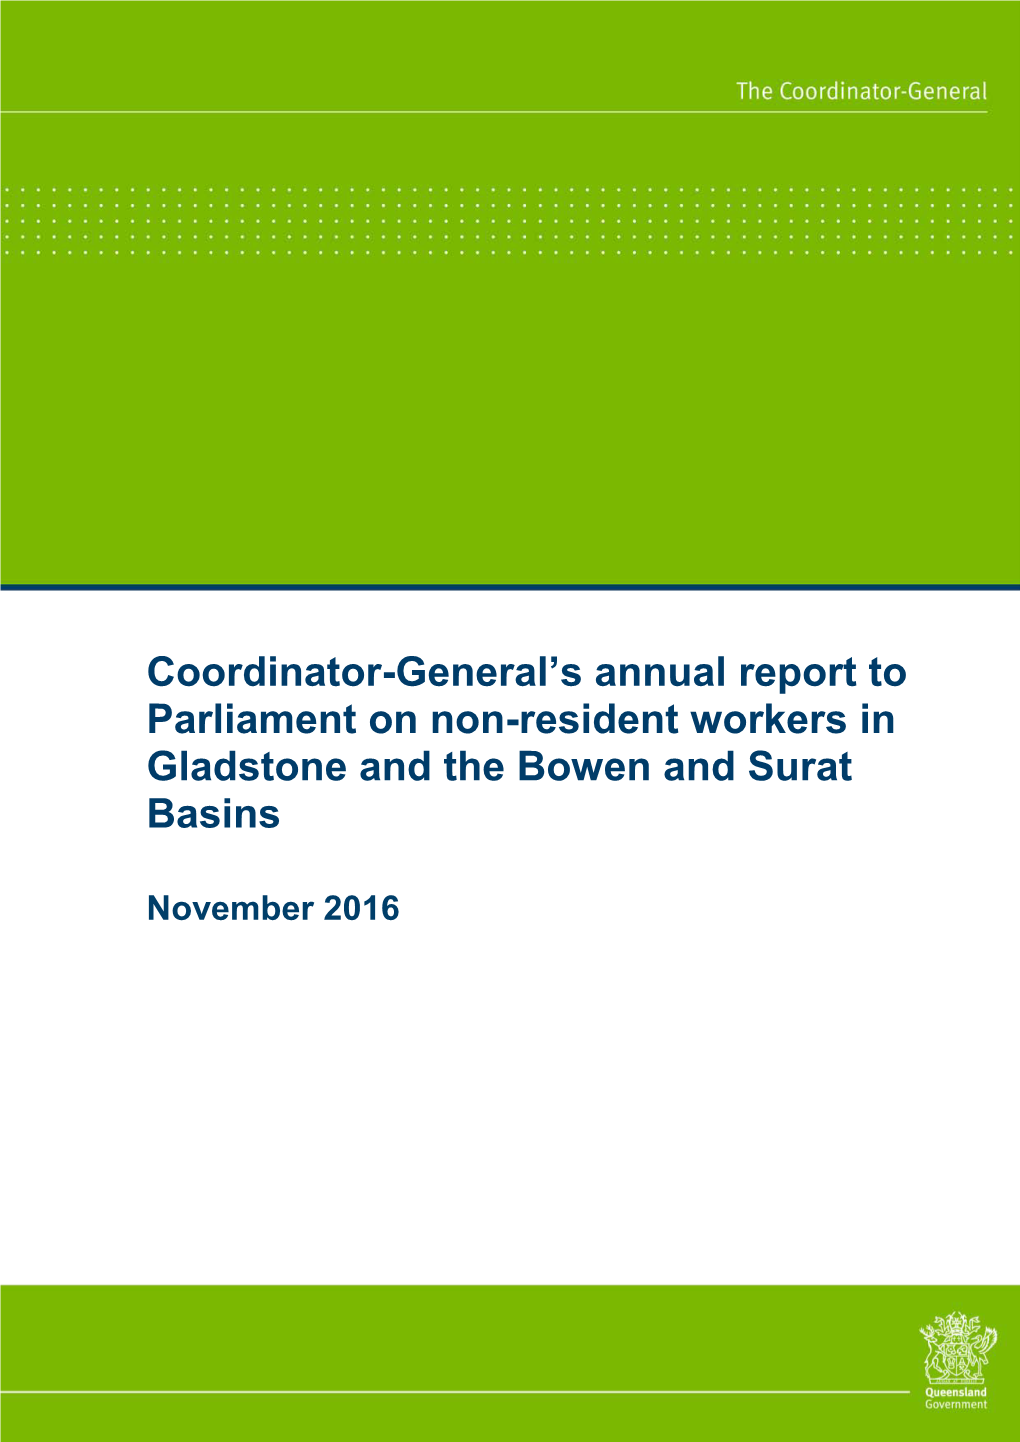 Coordinator-General's Annual Report to Parliament on Non-Resident Workers in Gladstone and the Bowen and Surat Basins